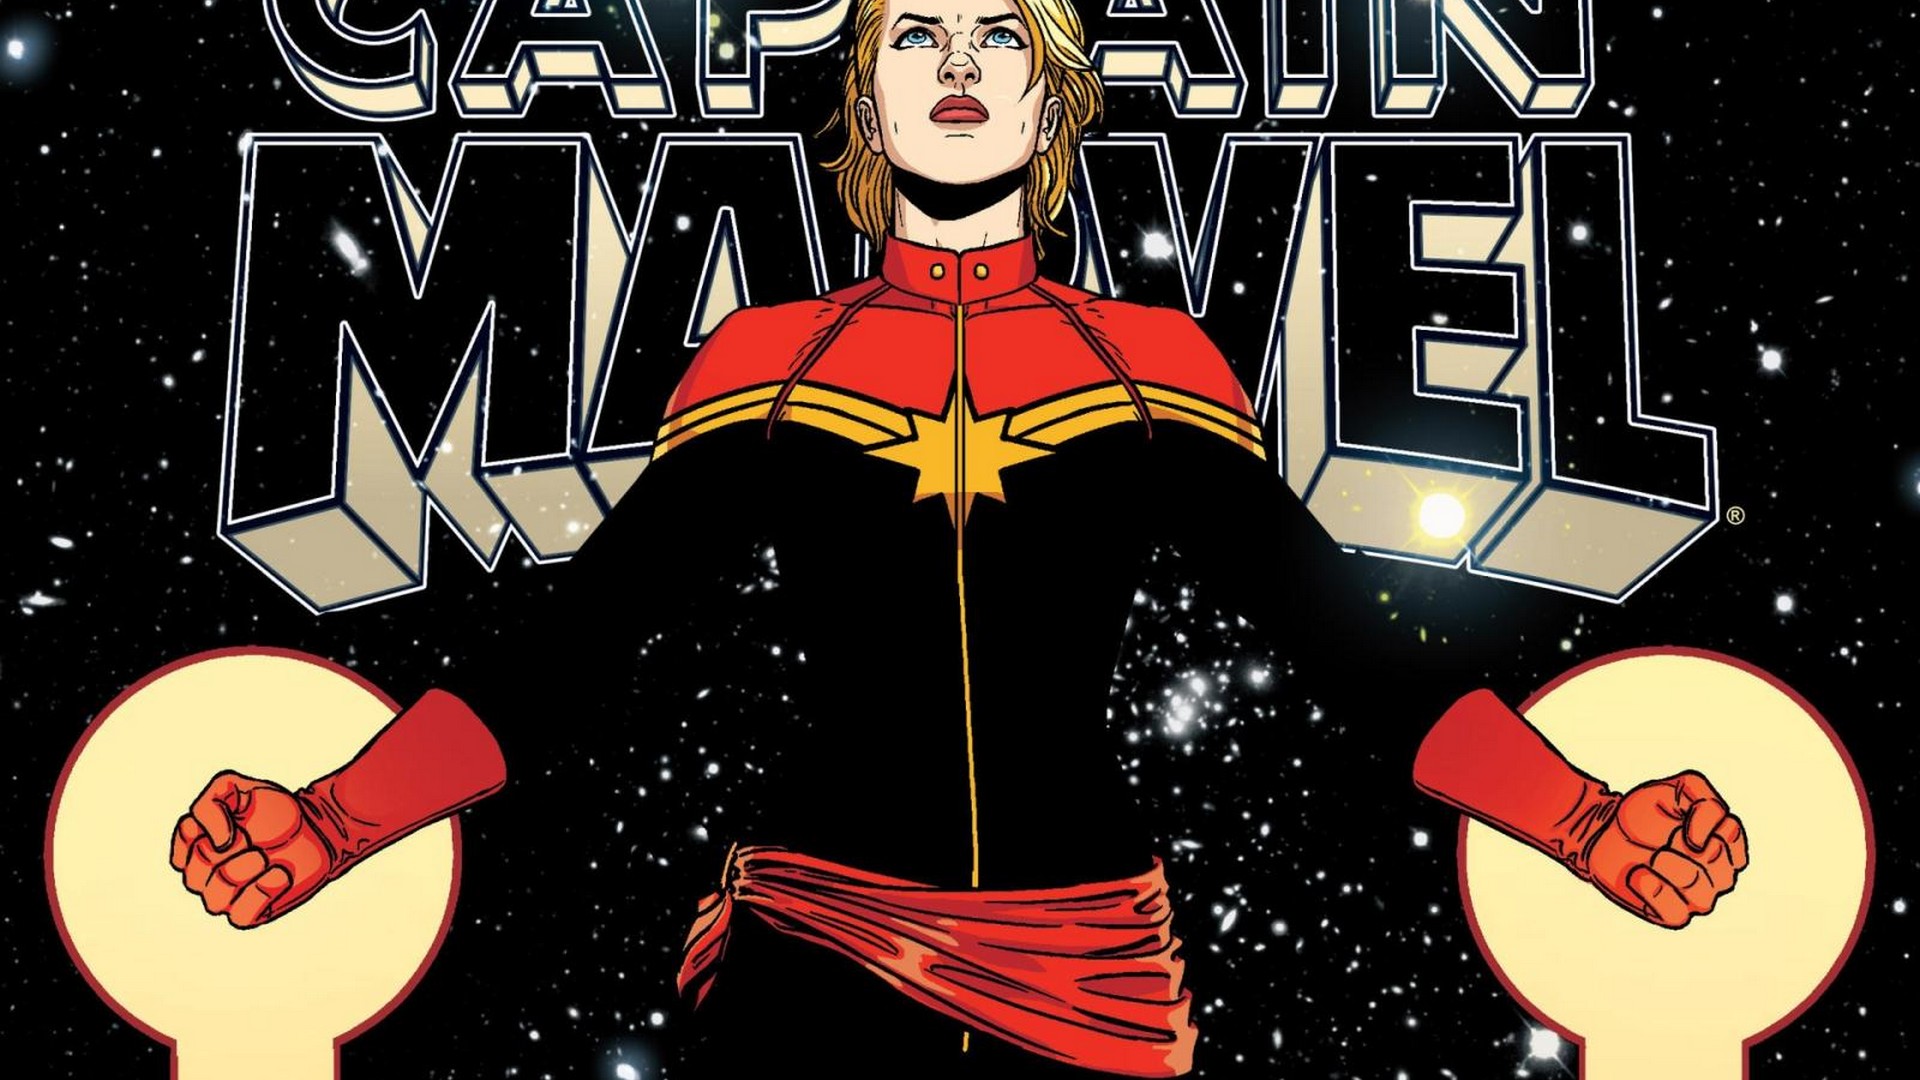 Captain Marvel Animated Wallpaper HD with high-resolution 1920x1080 pixel. You can use this poster wallpaper for your Desktop Computers, Mac Screensavers, Windows Backgrounds, iPhone Wallpapers, Tablet or Android Lock screen and another Mobile device